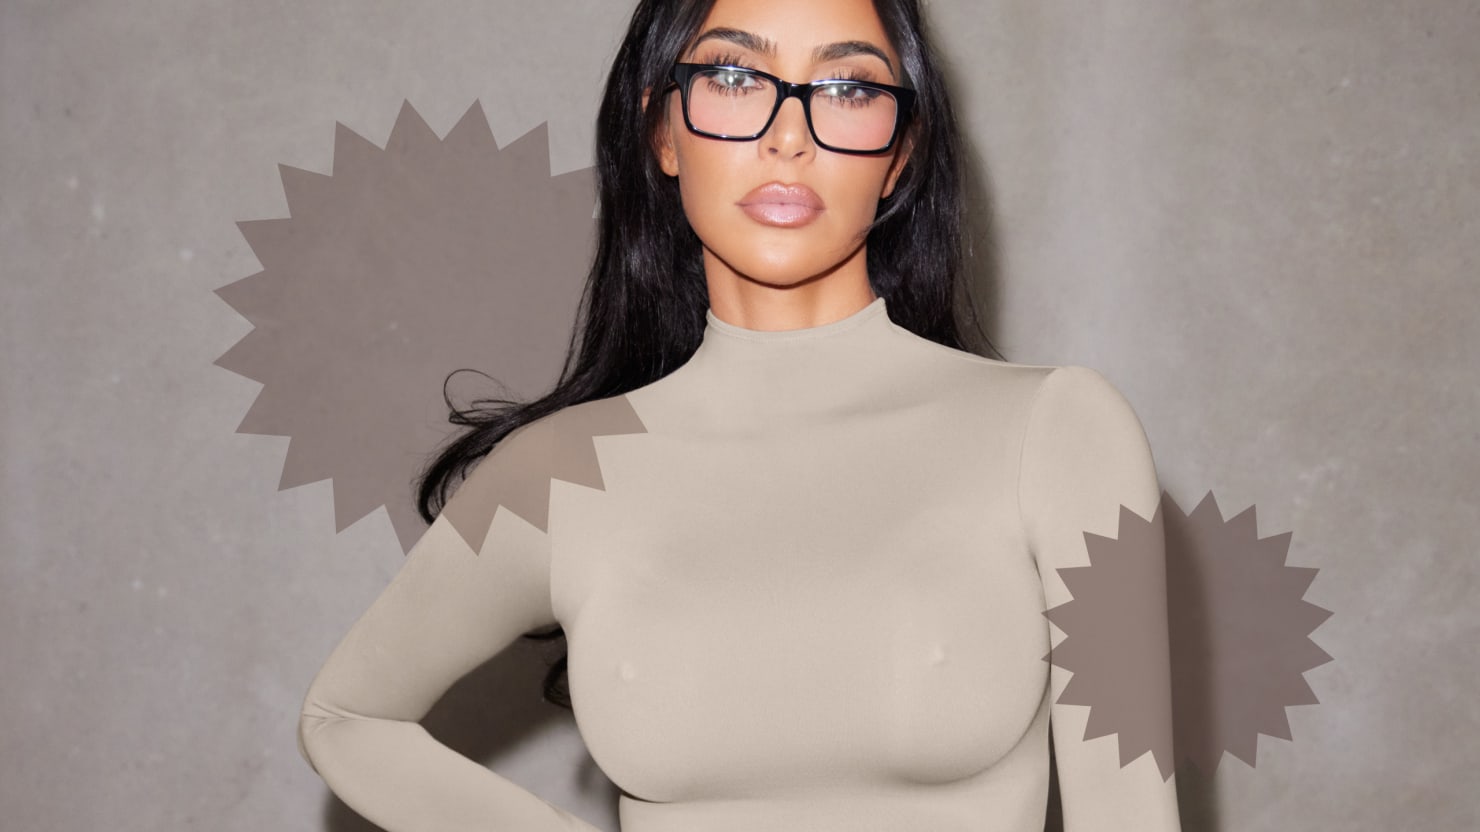 Kim Kardashian Is Selling Bras That Have Built-In Faux Nipples